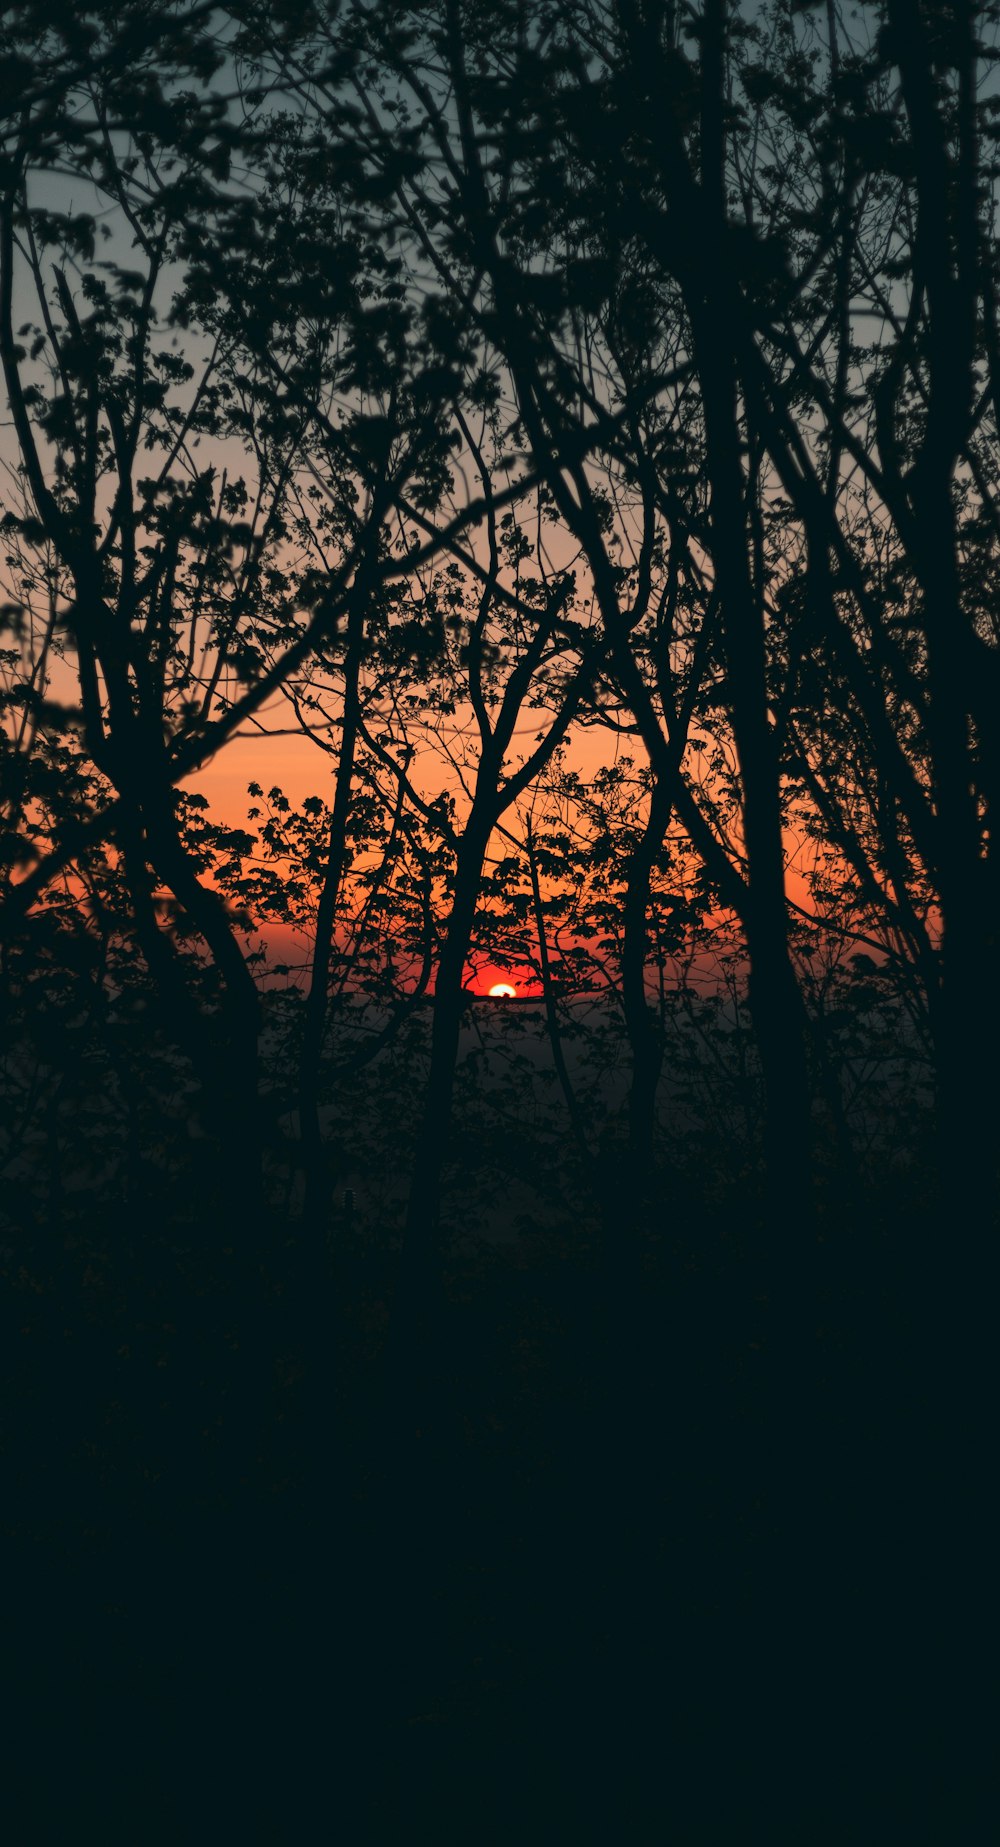 the sun is setting in the distance behind some trees